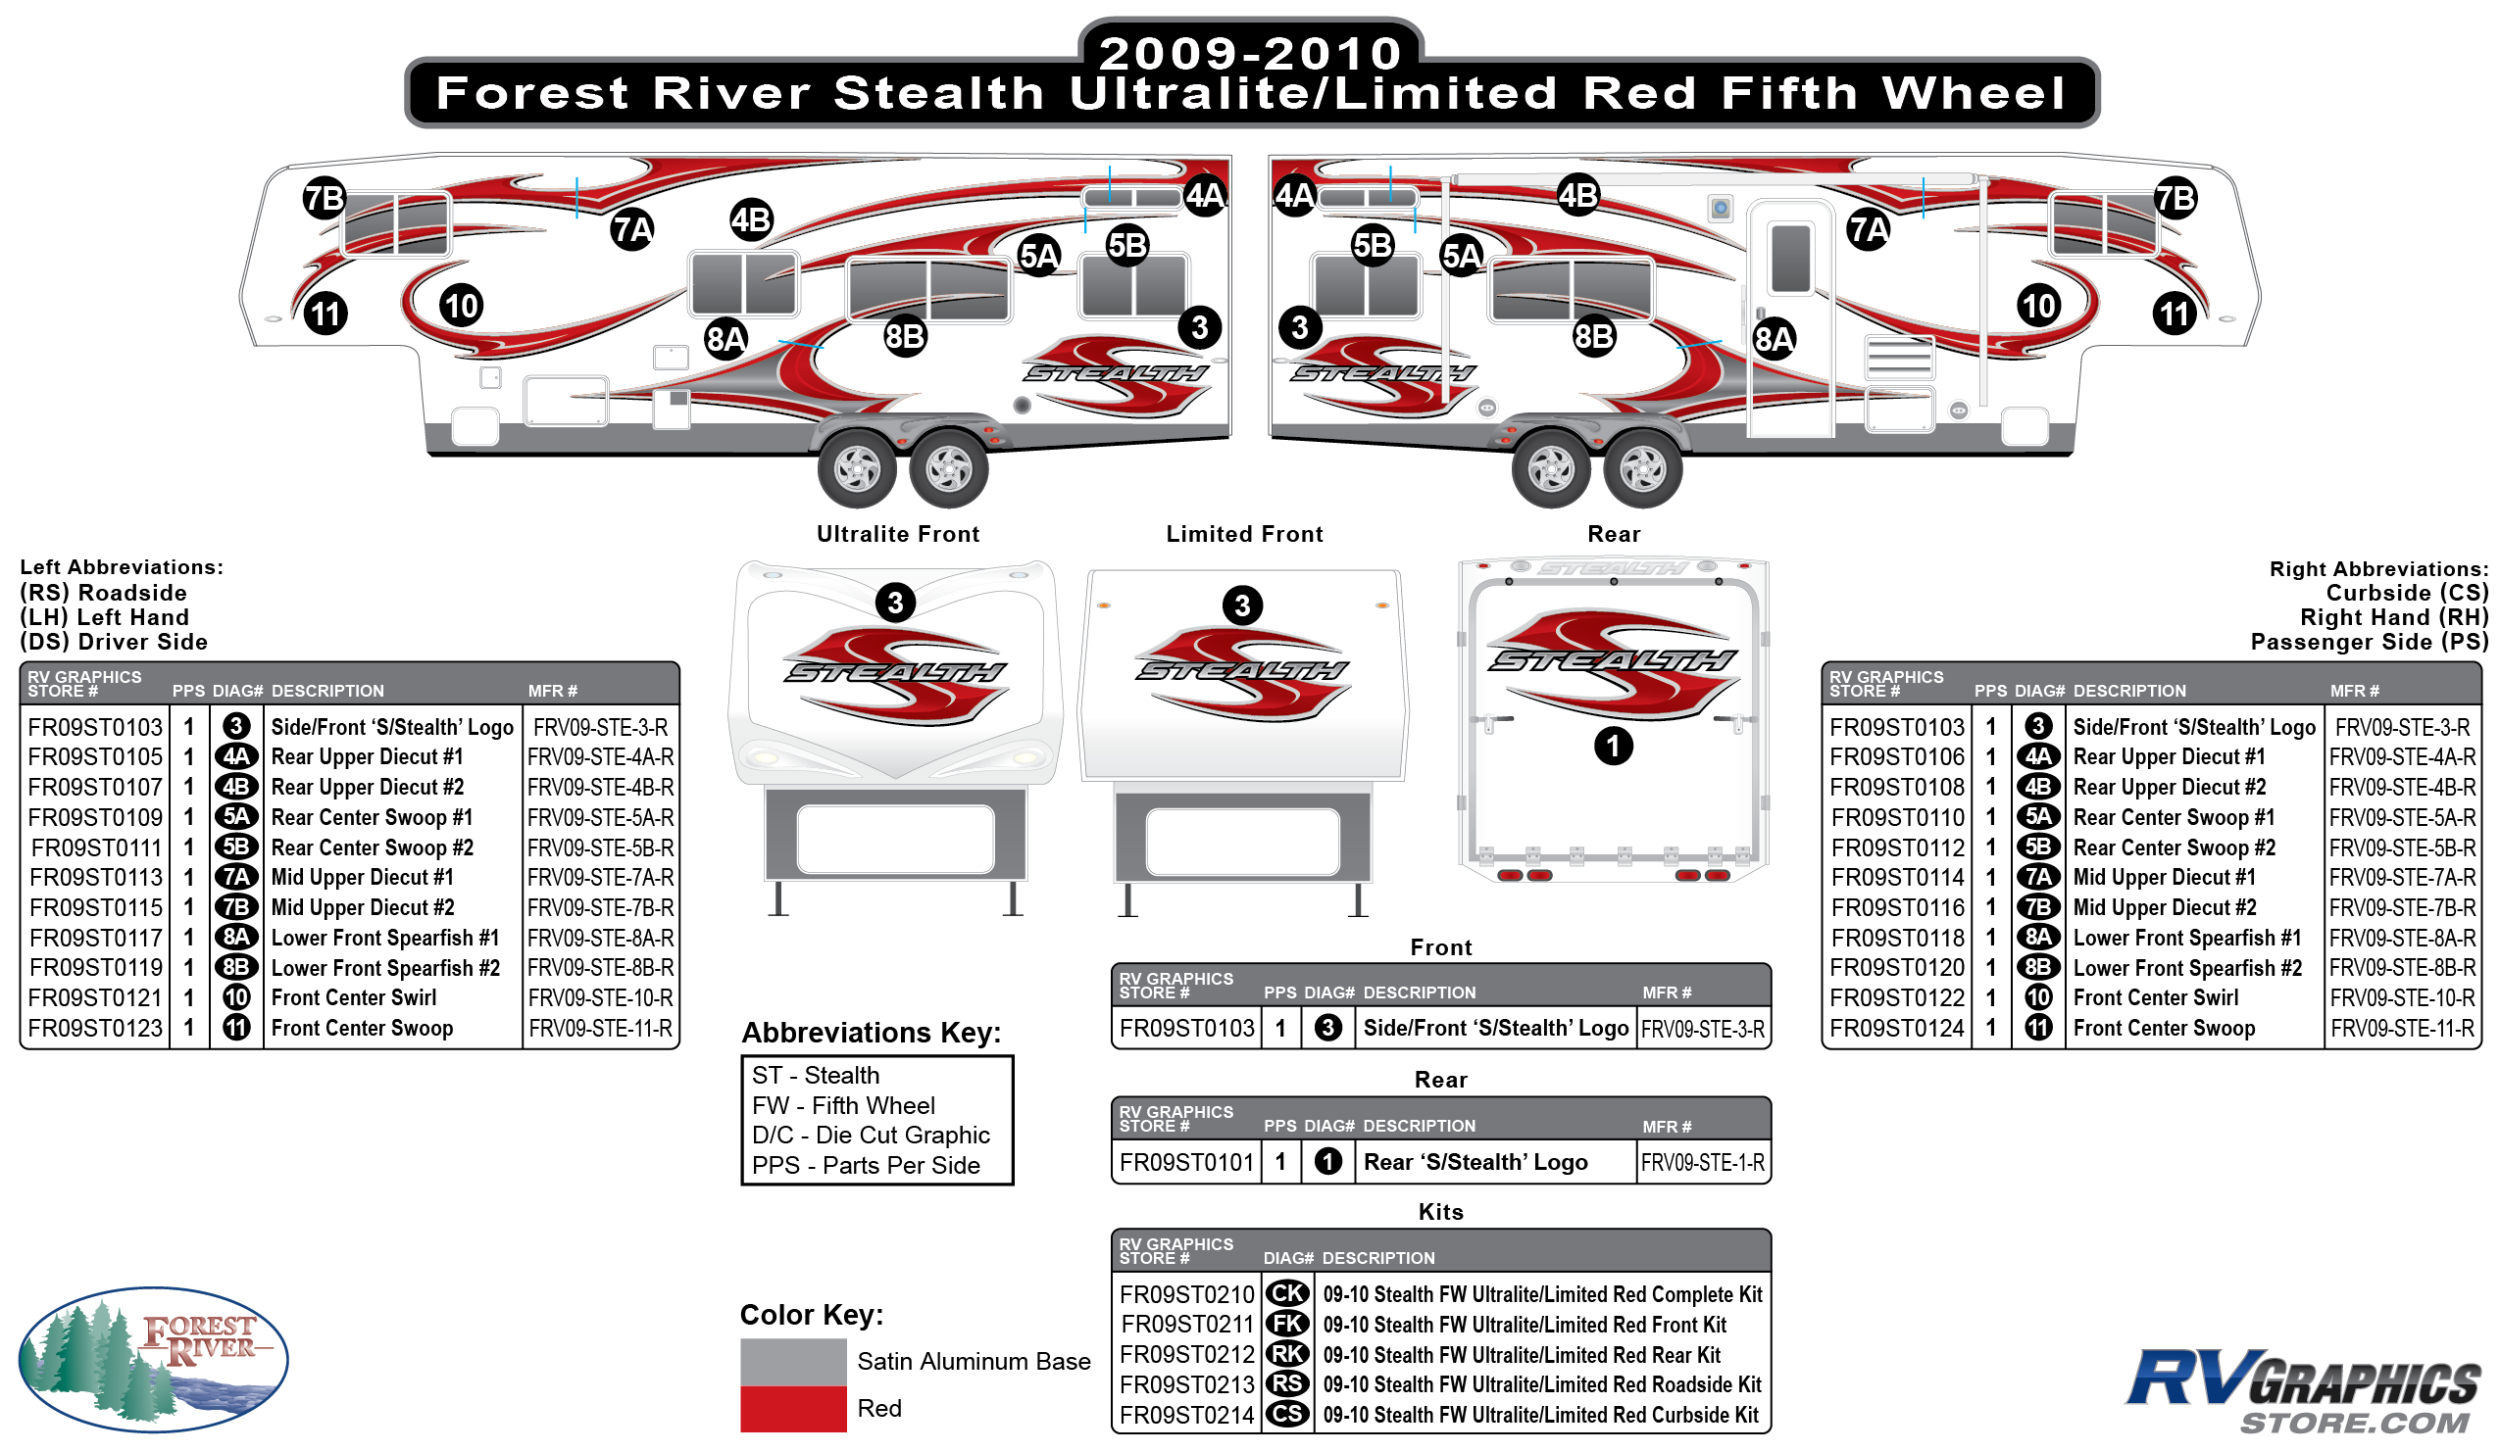 Stealth - 2009 Stealth FW-Fifth Wheel UltraLite/Limited-Red